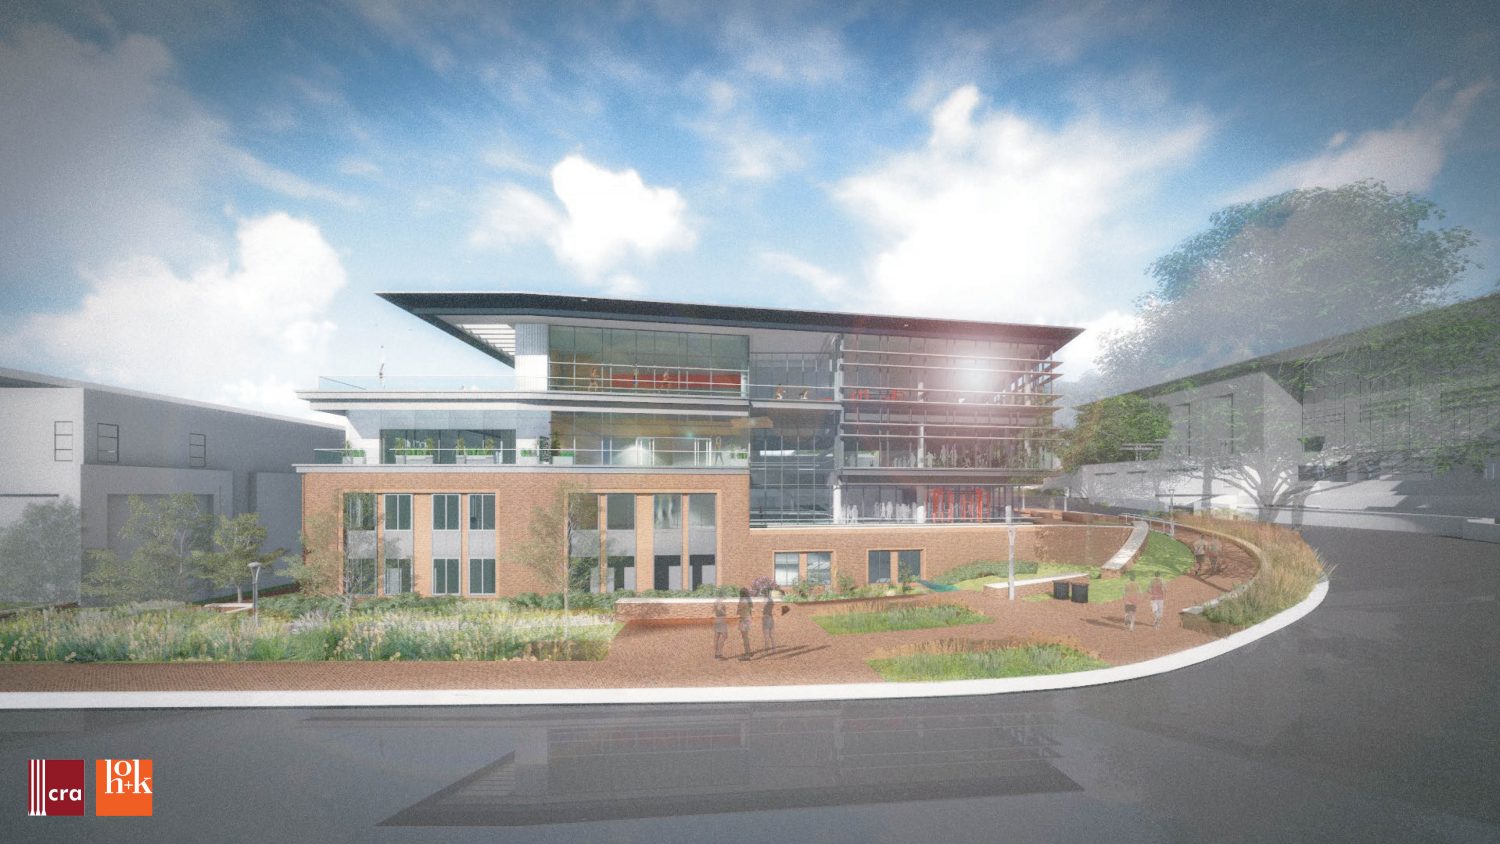 Rendering of the exterior of the new Wellness and Recreation Center